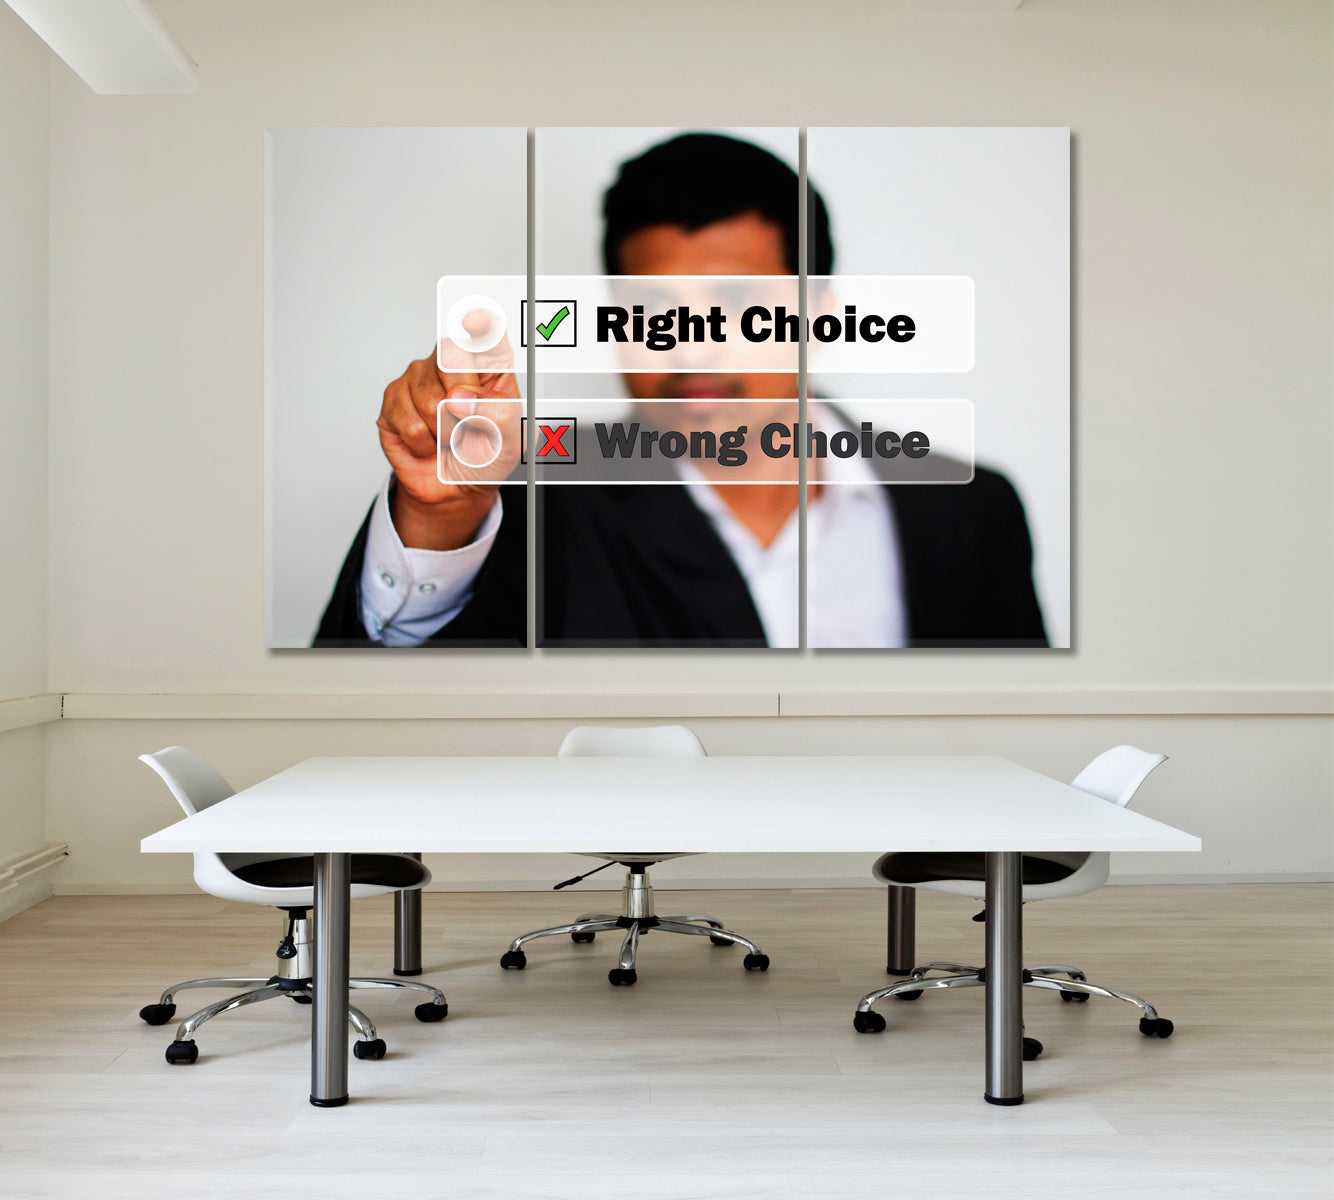 RIGHT CHOICE Business Concept Office Wall Art Canvas Print Artesty 3 panels 36" x 24" 